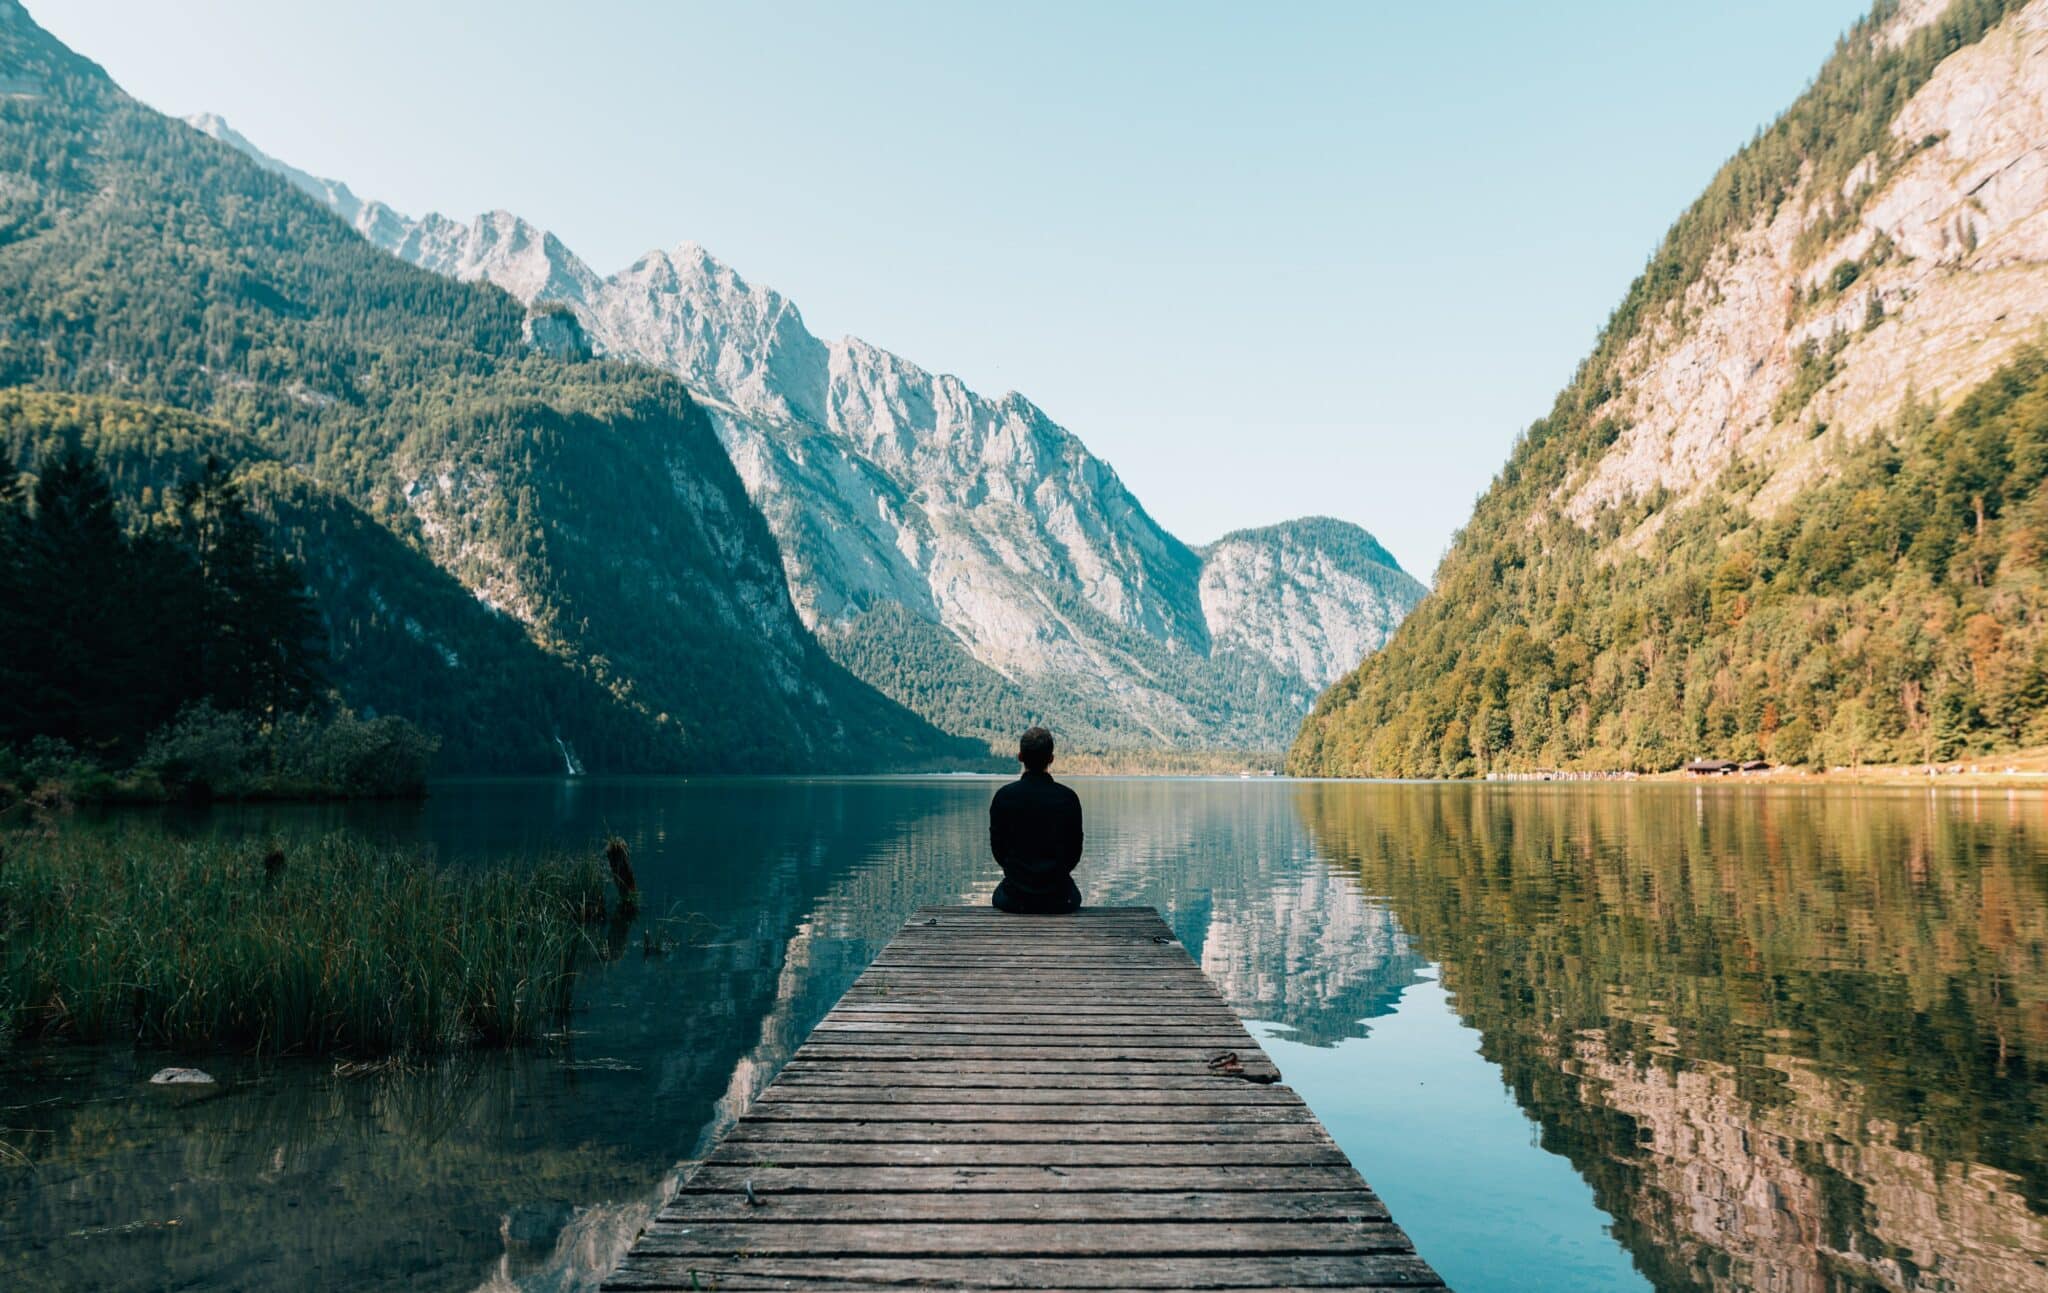 An image of a person on a dock on a lake | Mental Health Benefits of Being Outdoors